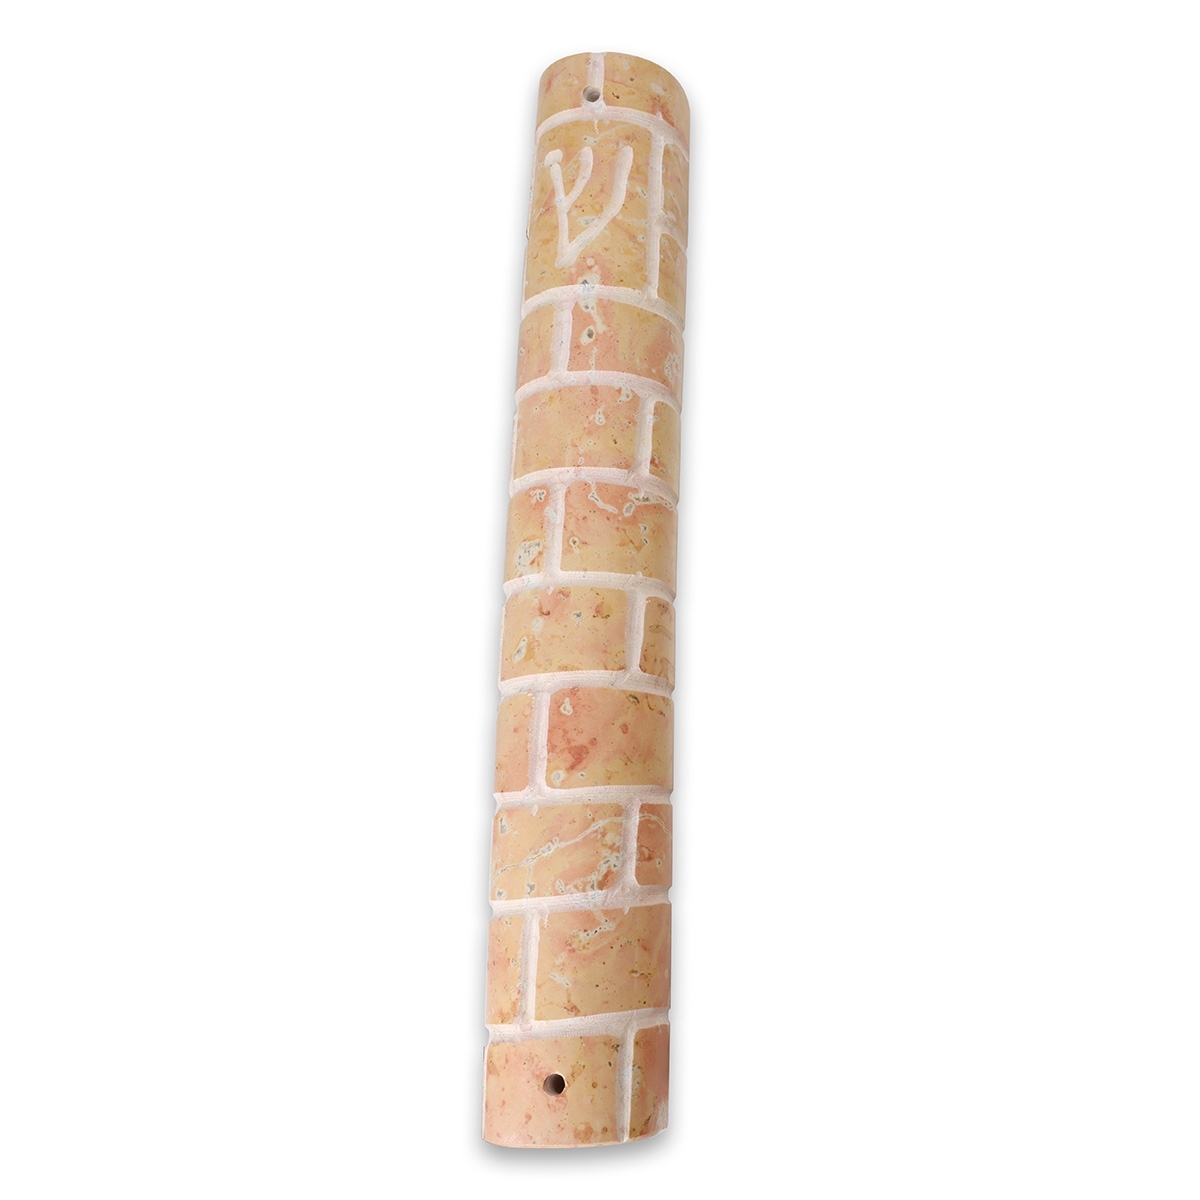 Extra Large Jerusalem Stone Mezuzah Case with Shin and Western Wall Design - Color Option - 1